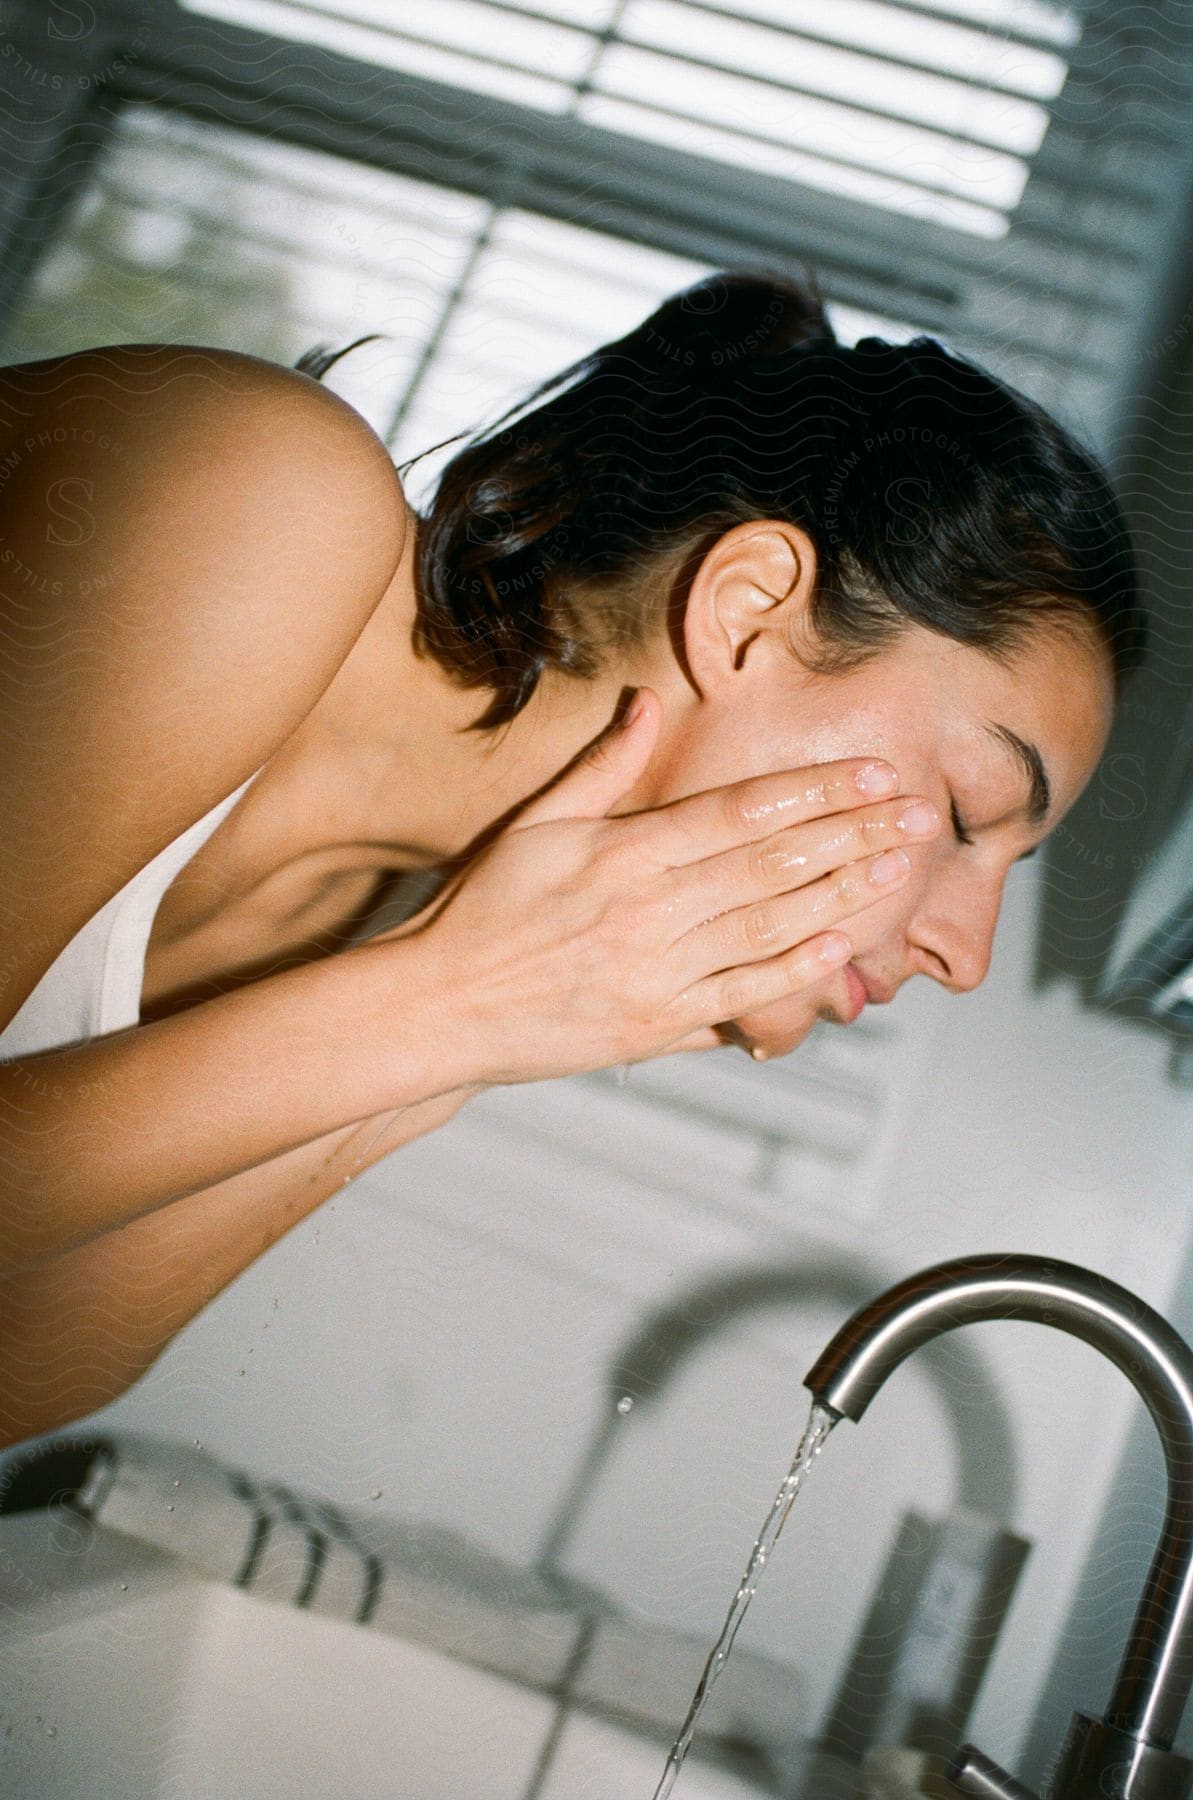 A Woman Washes Her Face Over A Running Sink